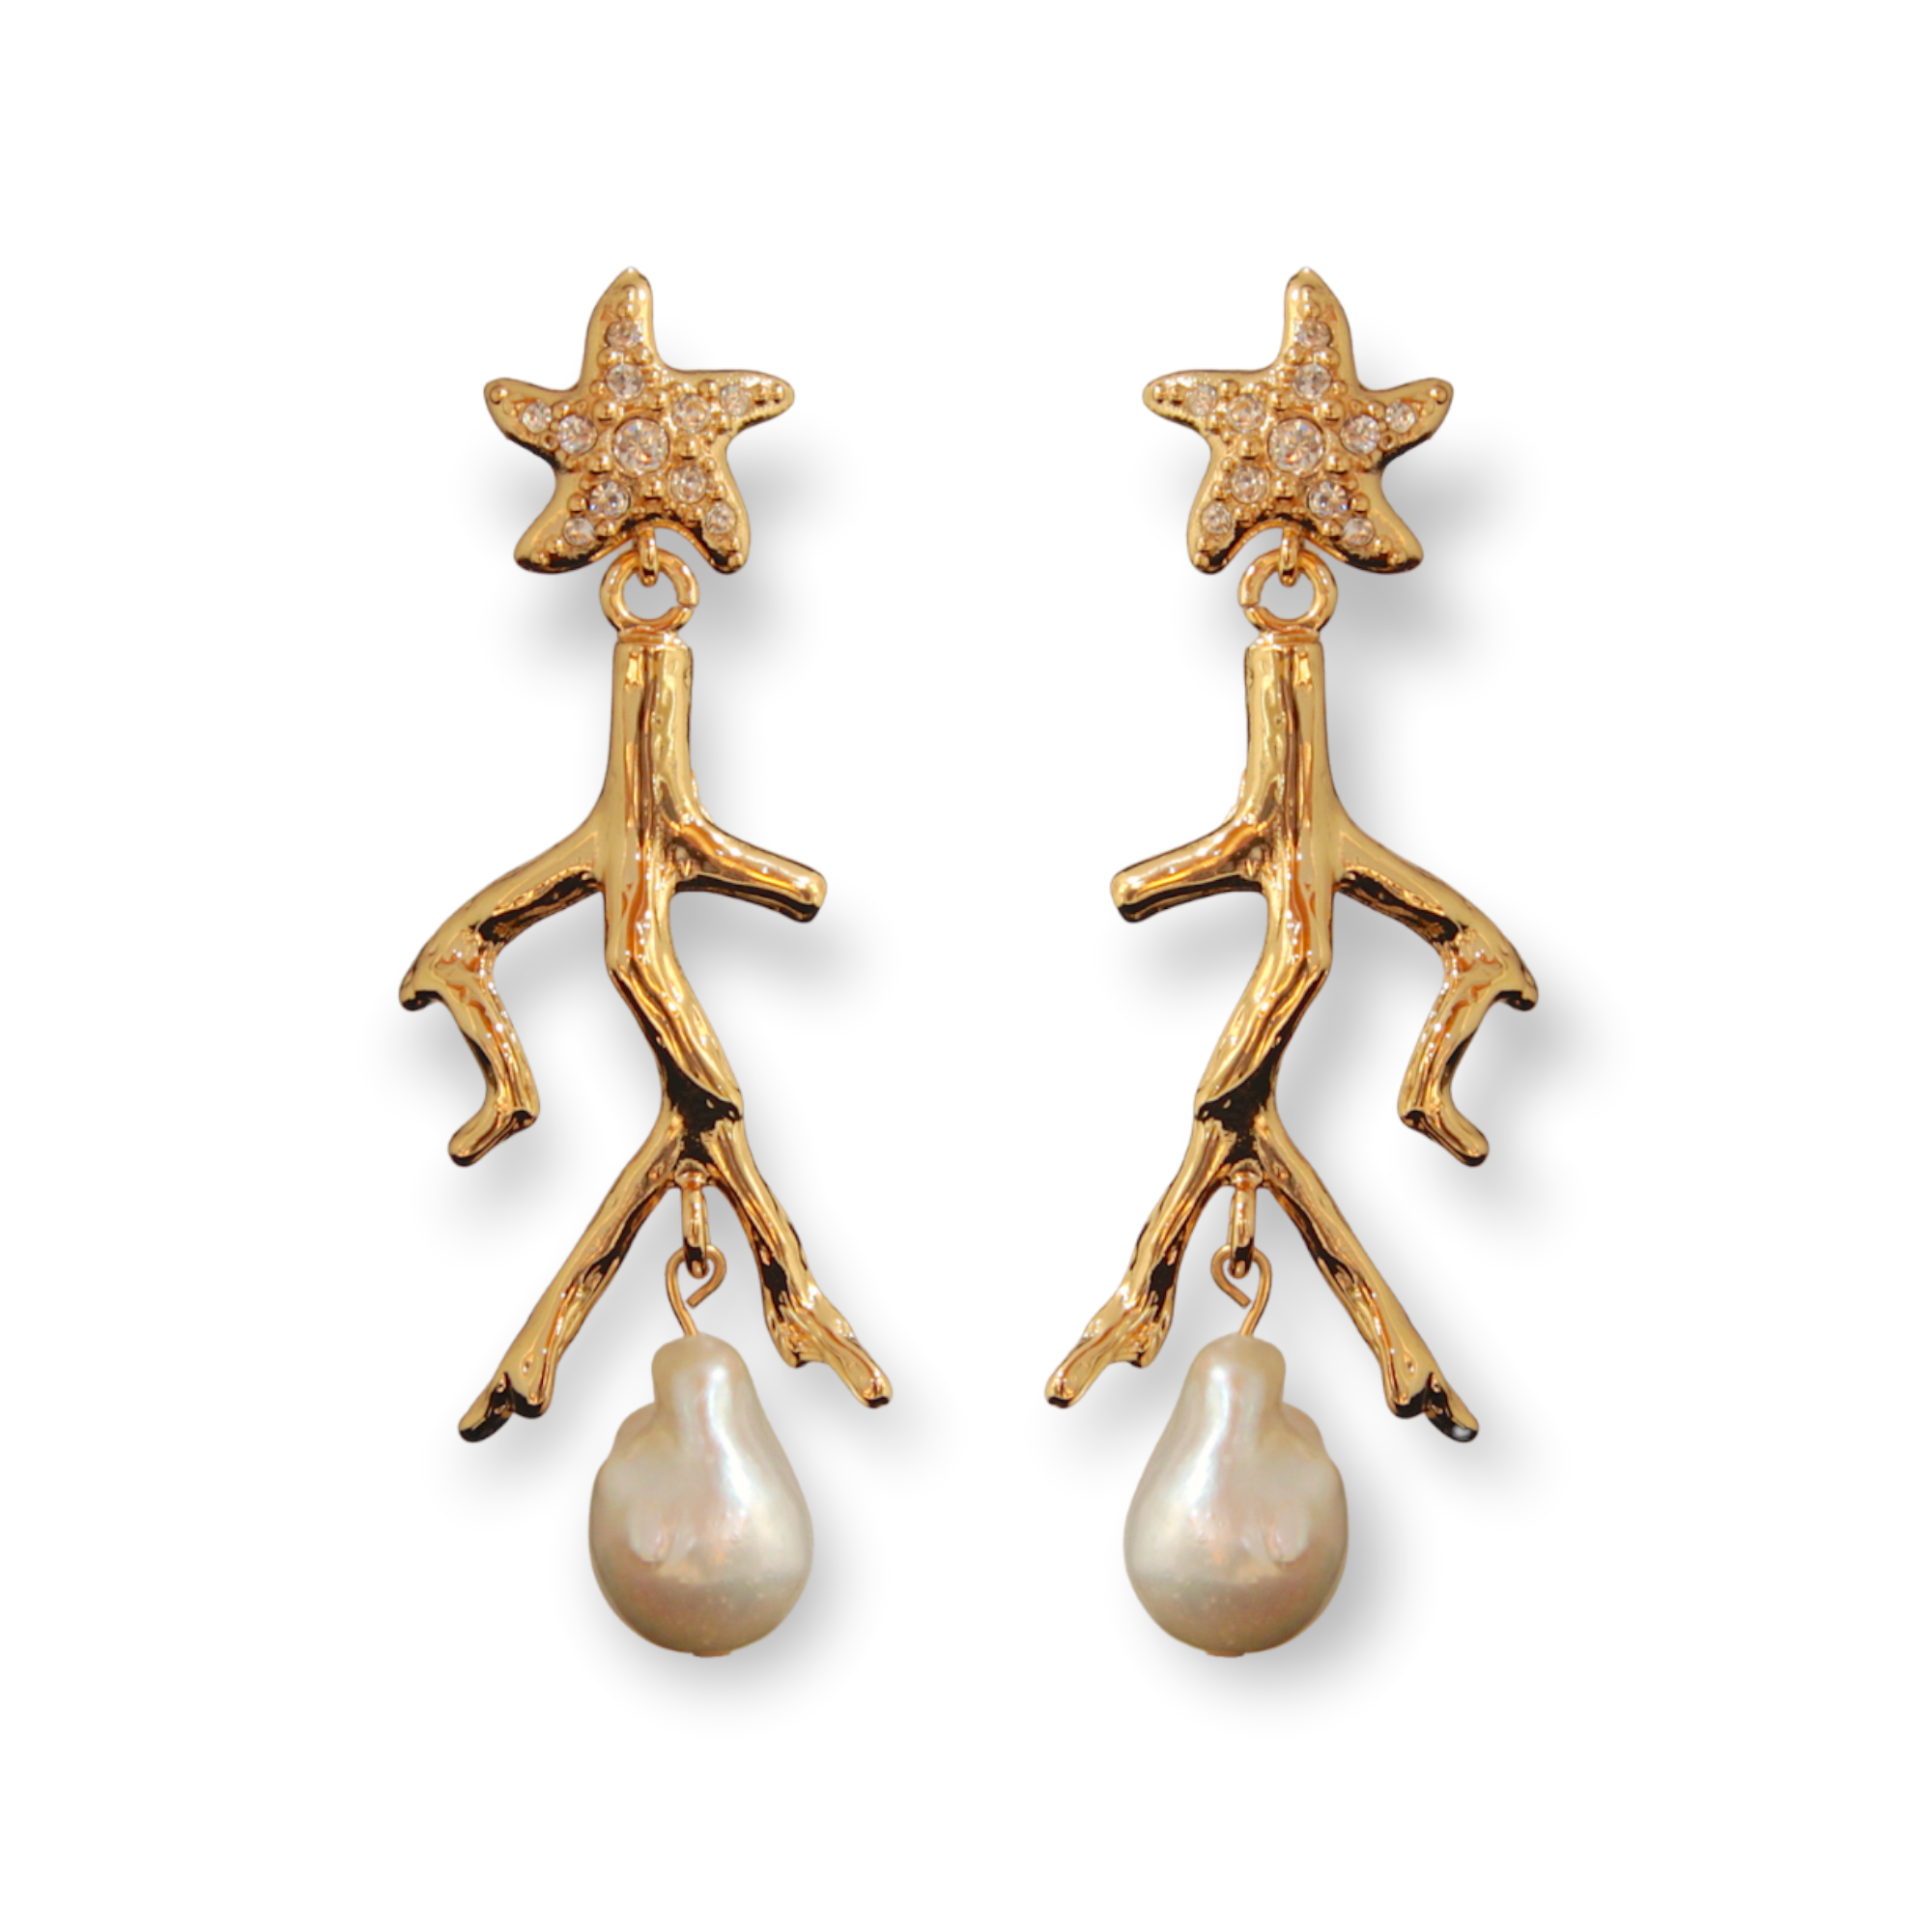 EARRINGS 2265 Gold plated